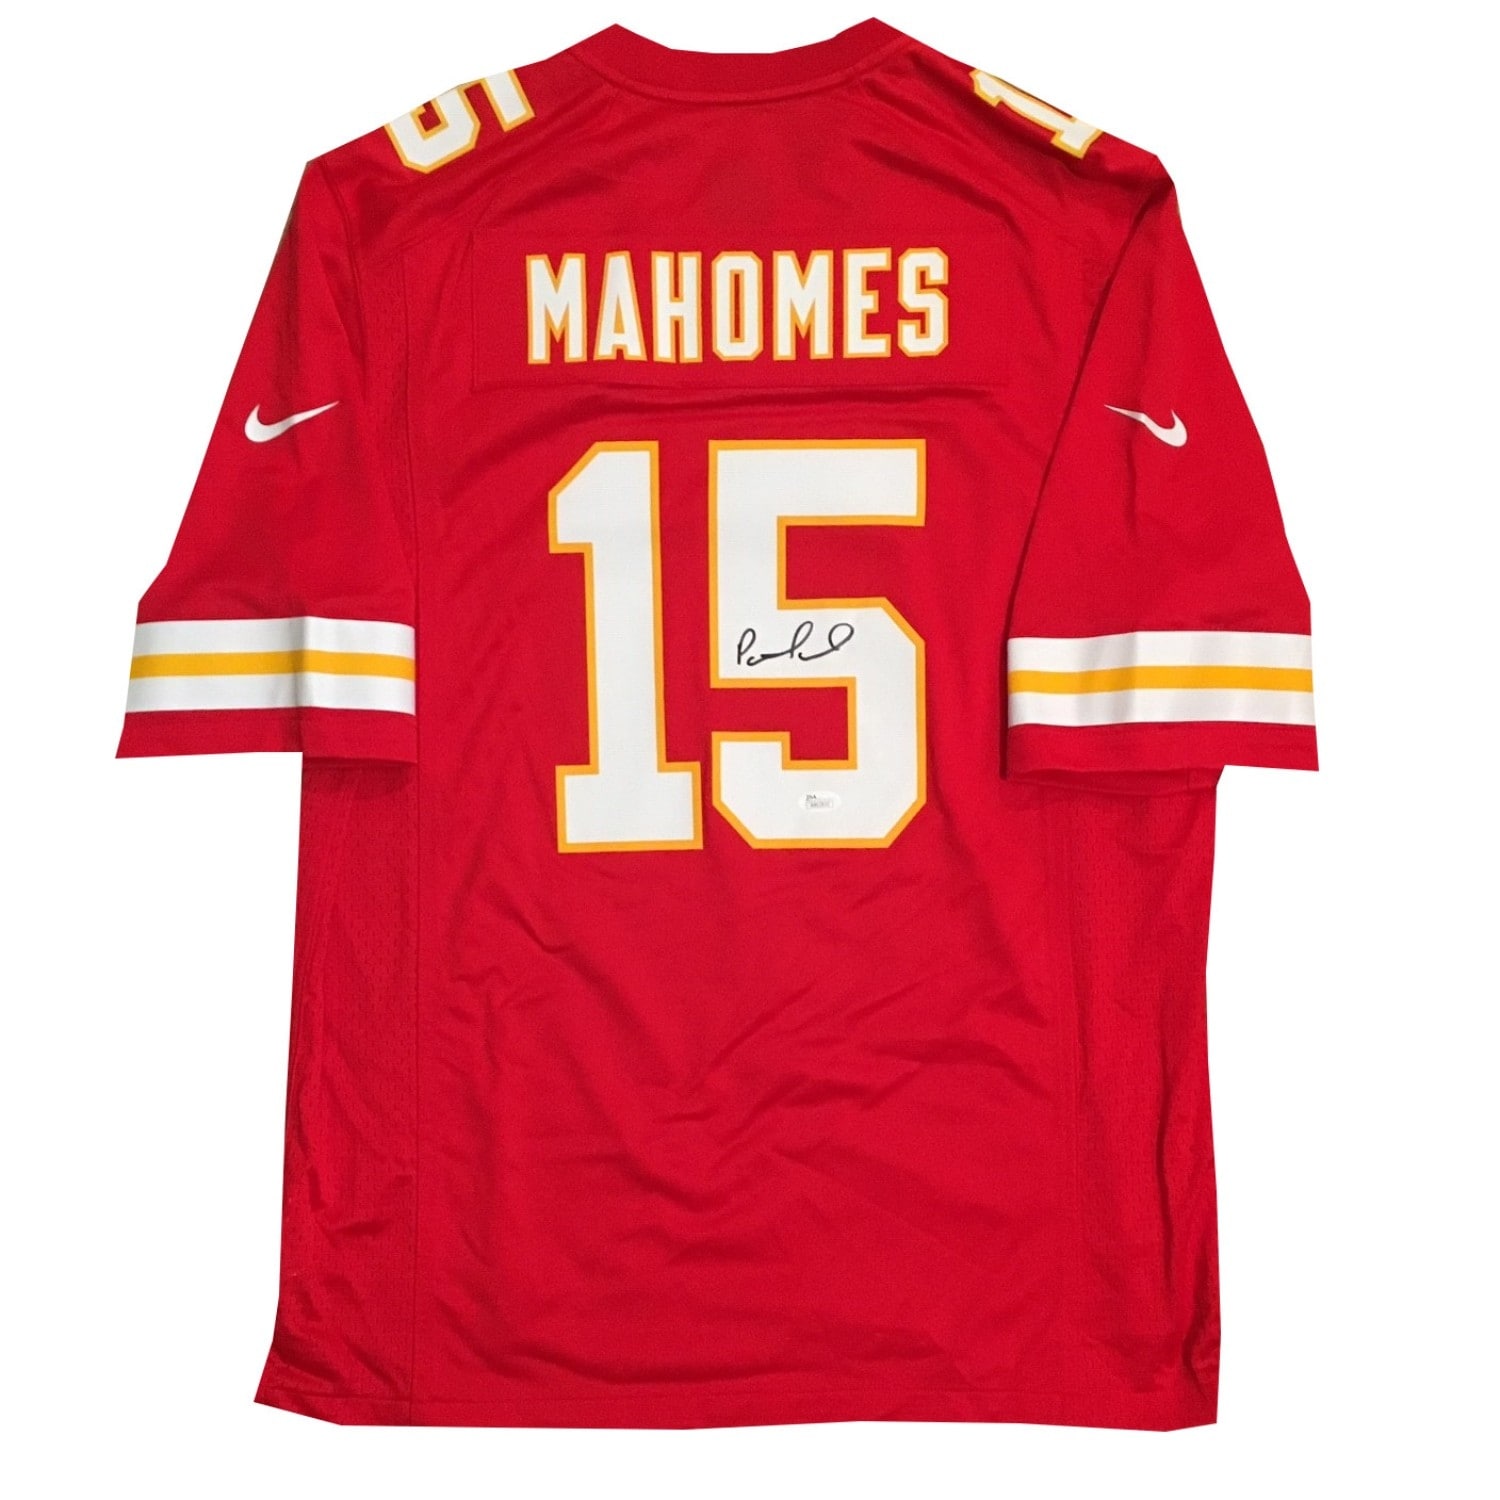 patrick mahomes autographed jersey